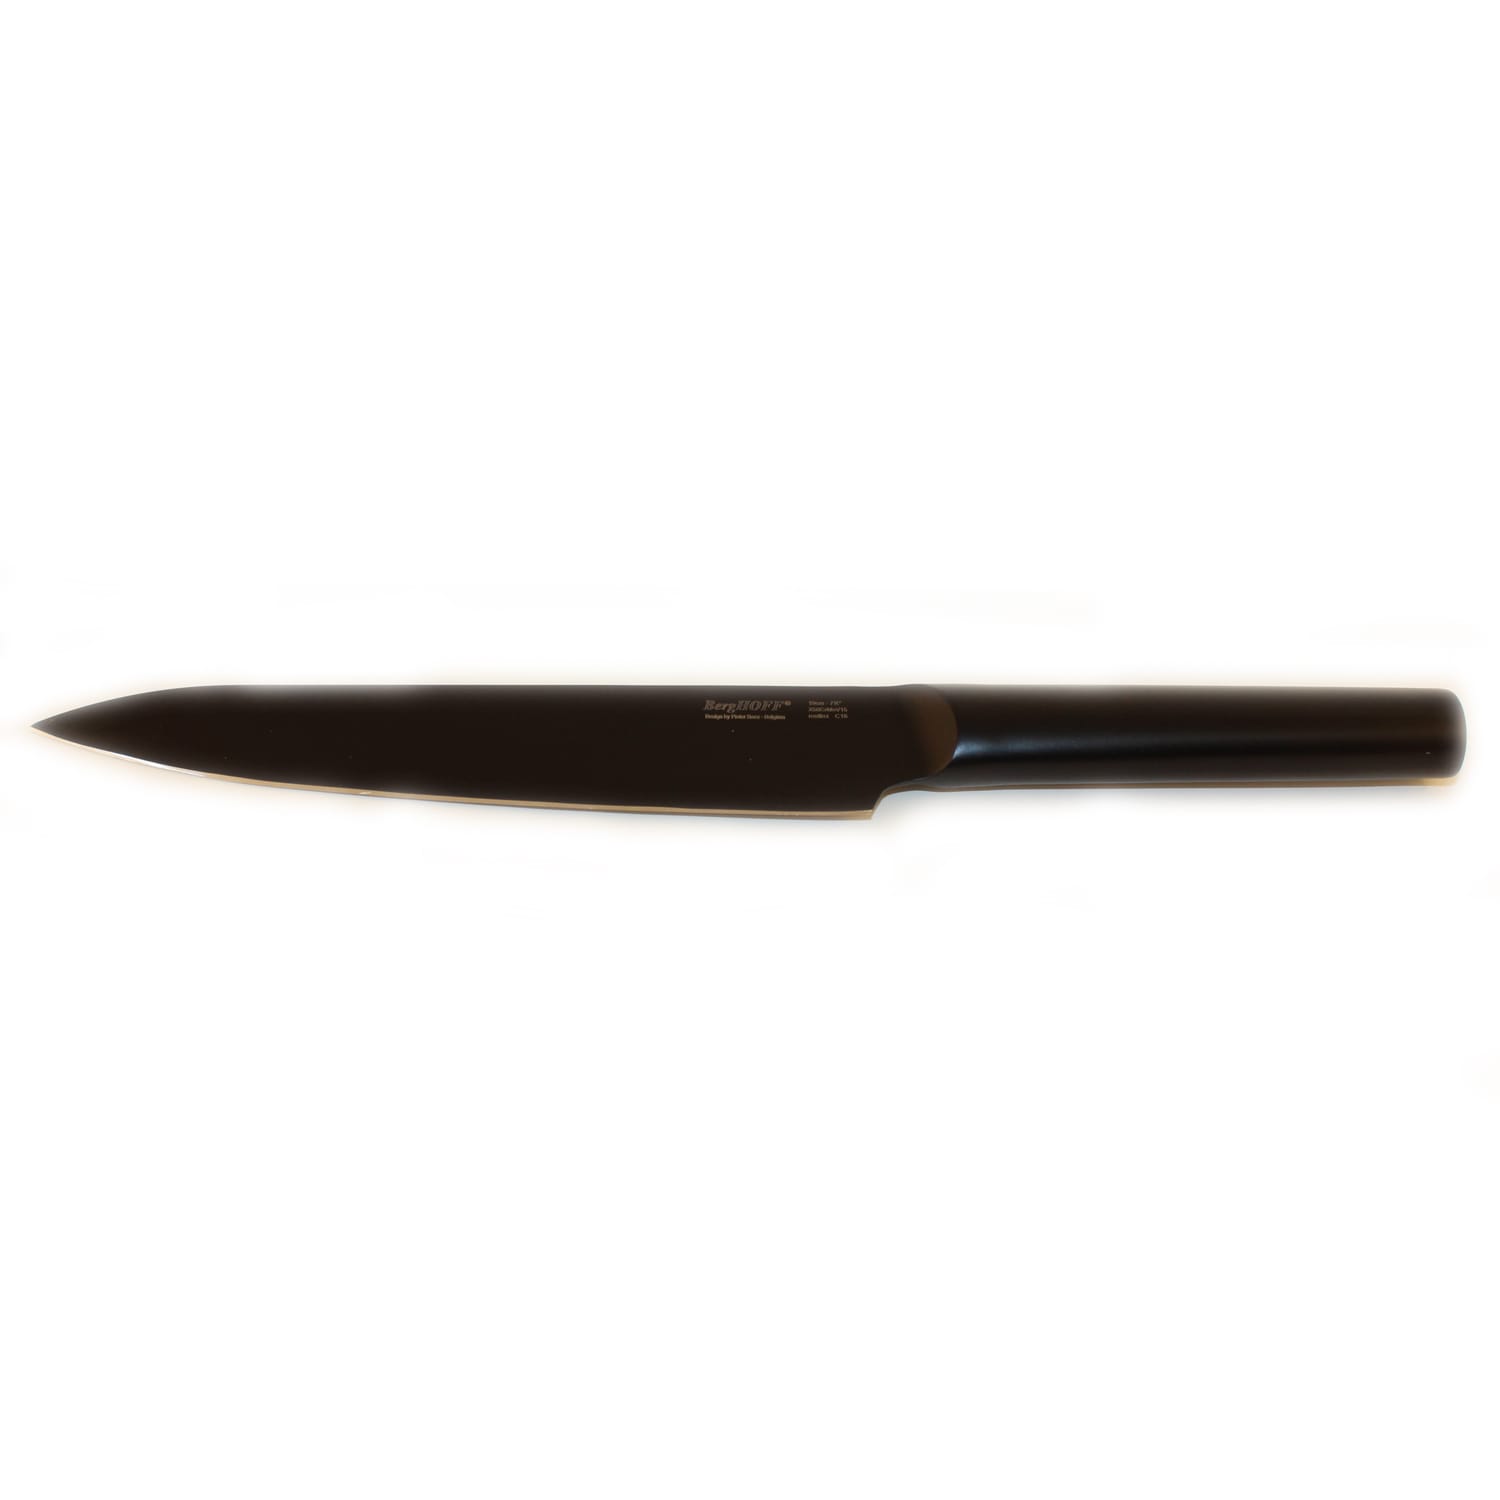 https://ak1.ostkcdn.com/images/products/13328471/BergHOFF-Ron-Black-Stainless-Steel-7.5-inch-Carving-Knife-2f8d902d-0f8e-45ef-a03d-1191e75d0828.jpg